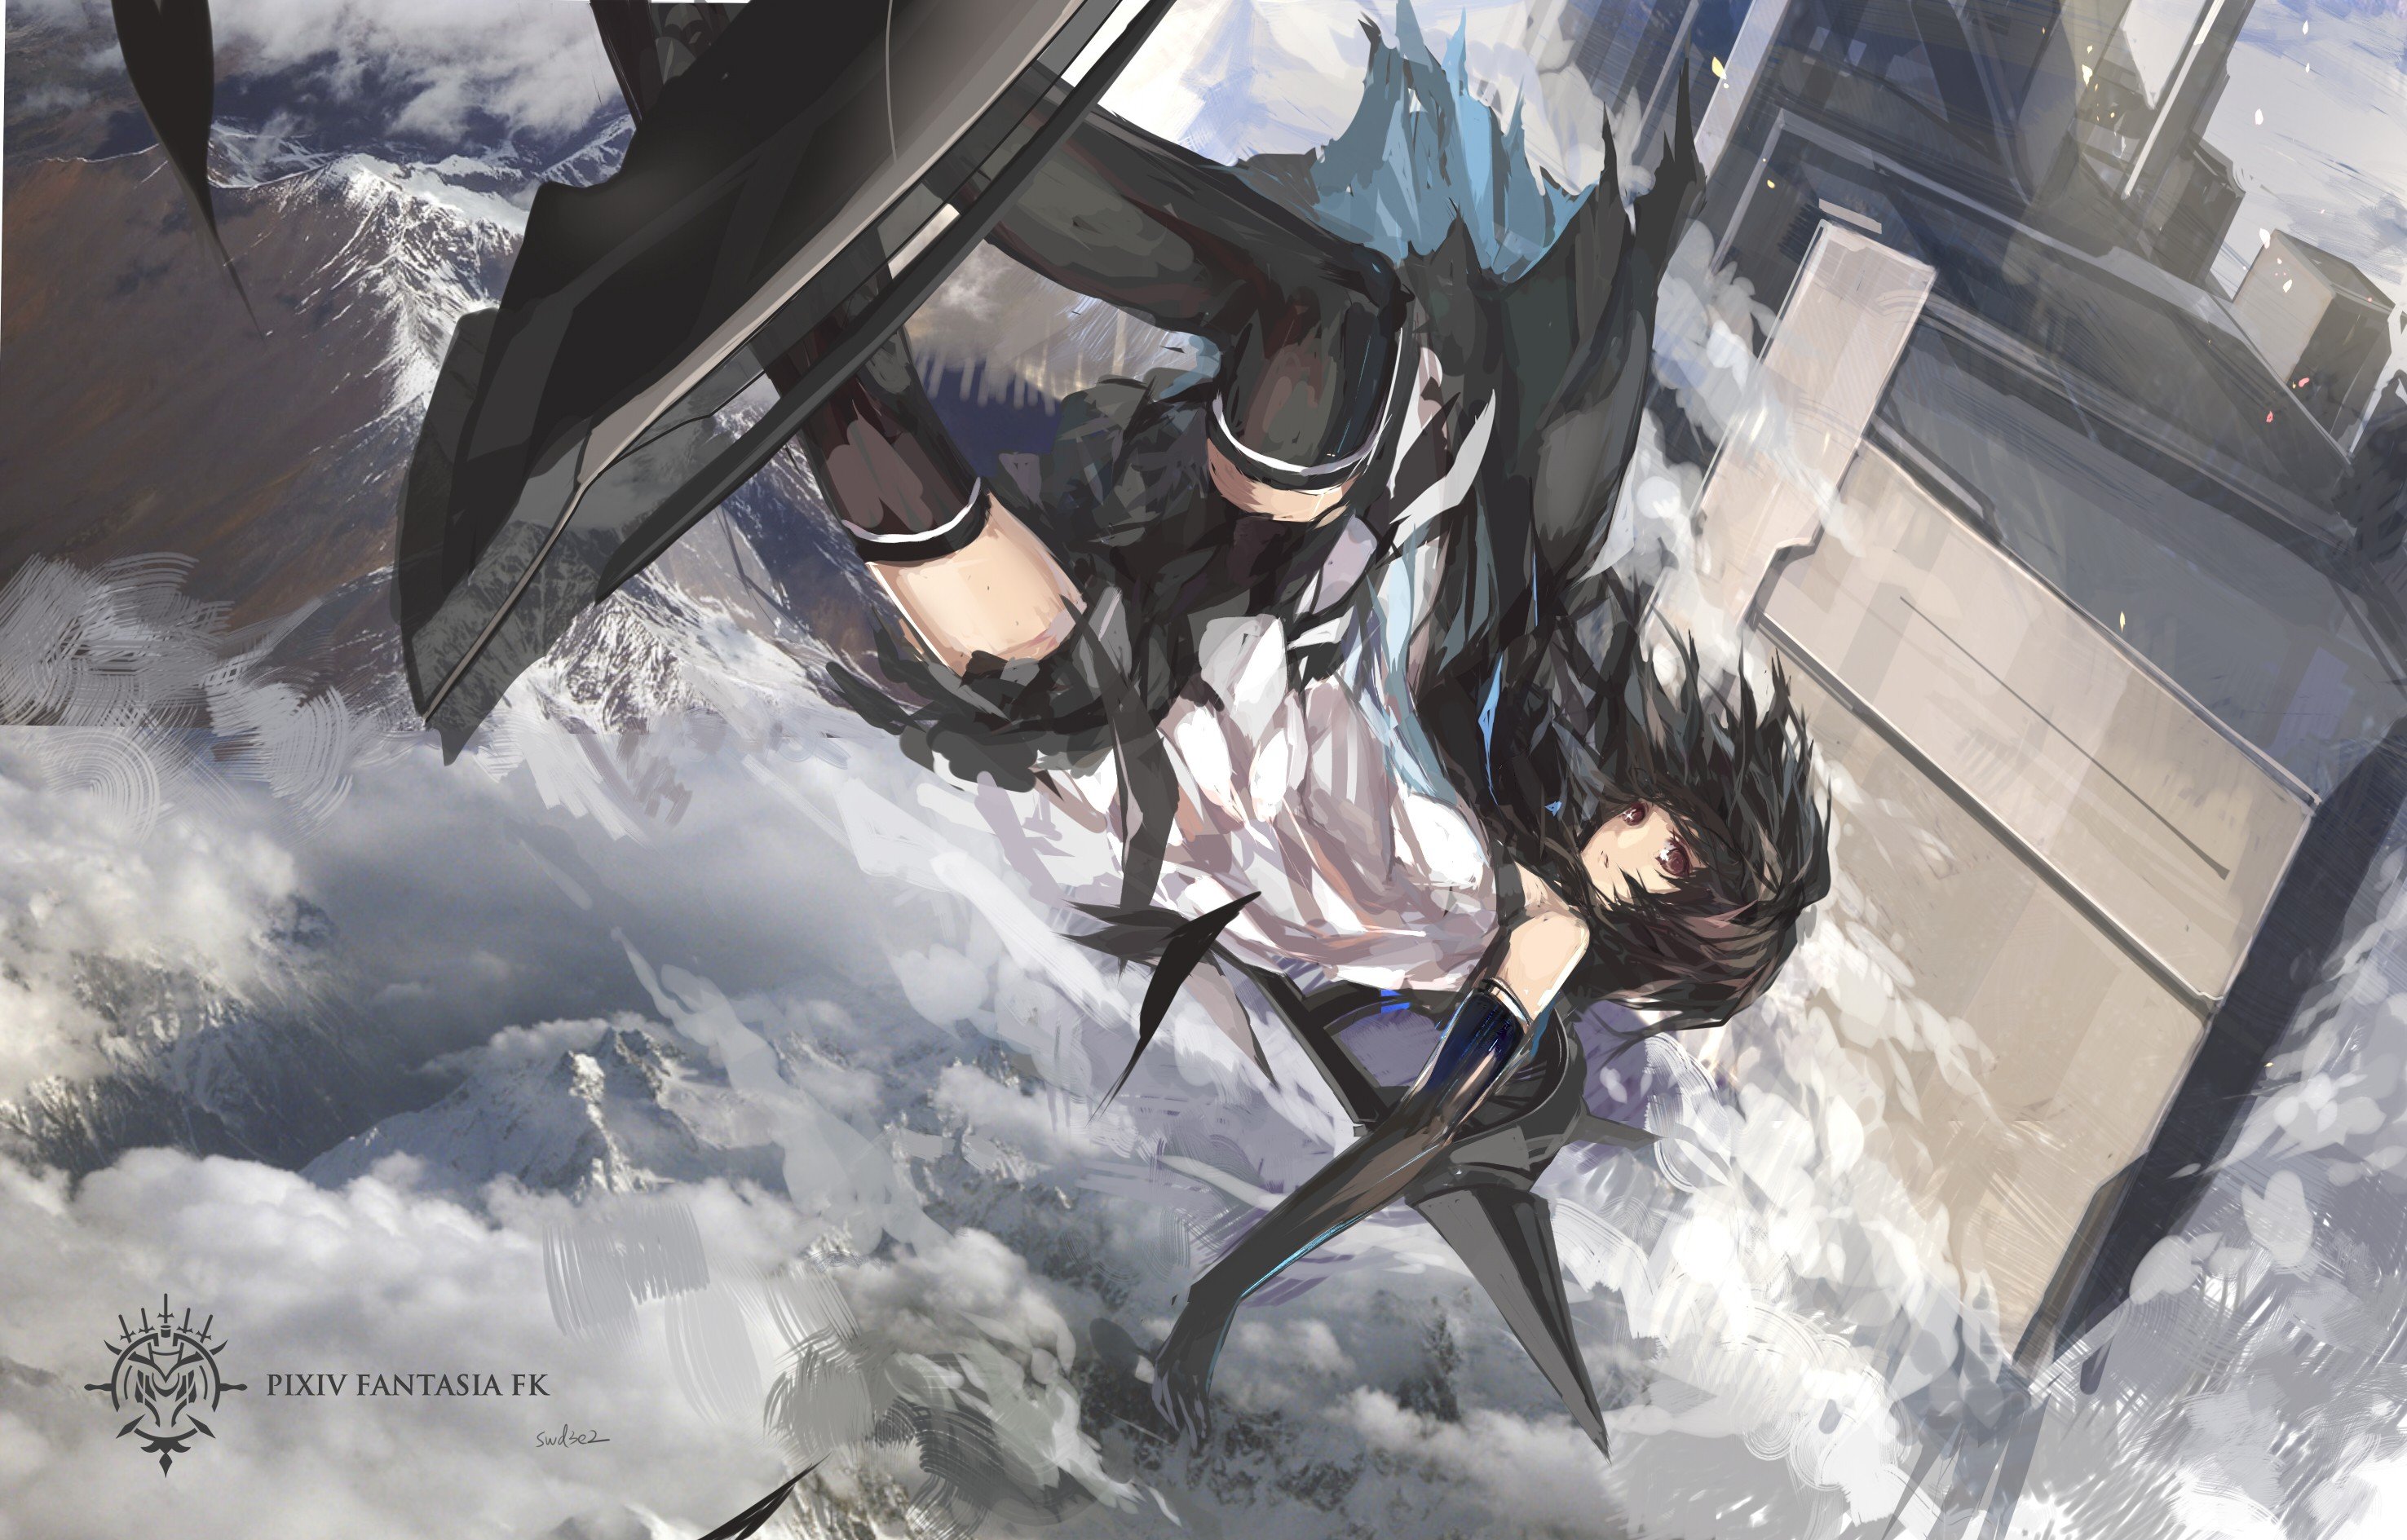 Pixiv Fantasia Swd3e2 Long Hair Skirt Thigh Highs Falling Mountain Clouds Anime Girls Anime Pixiv Fantasia Fallen Kings Original Characters Wallpapers Hd Desktop And Mobile Backgrounds